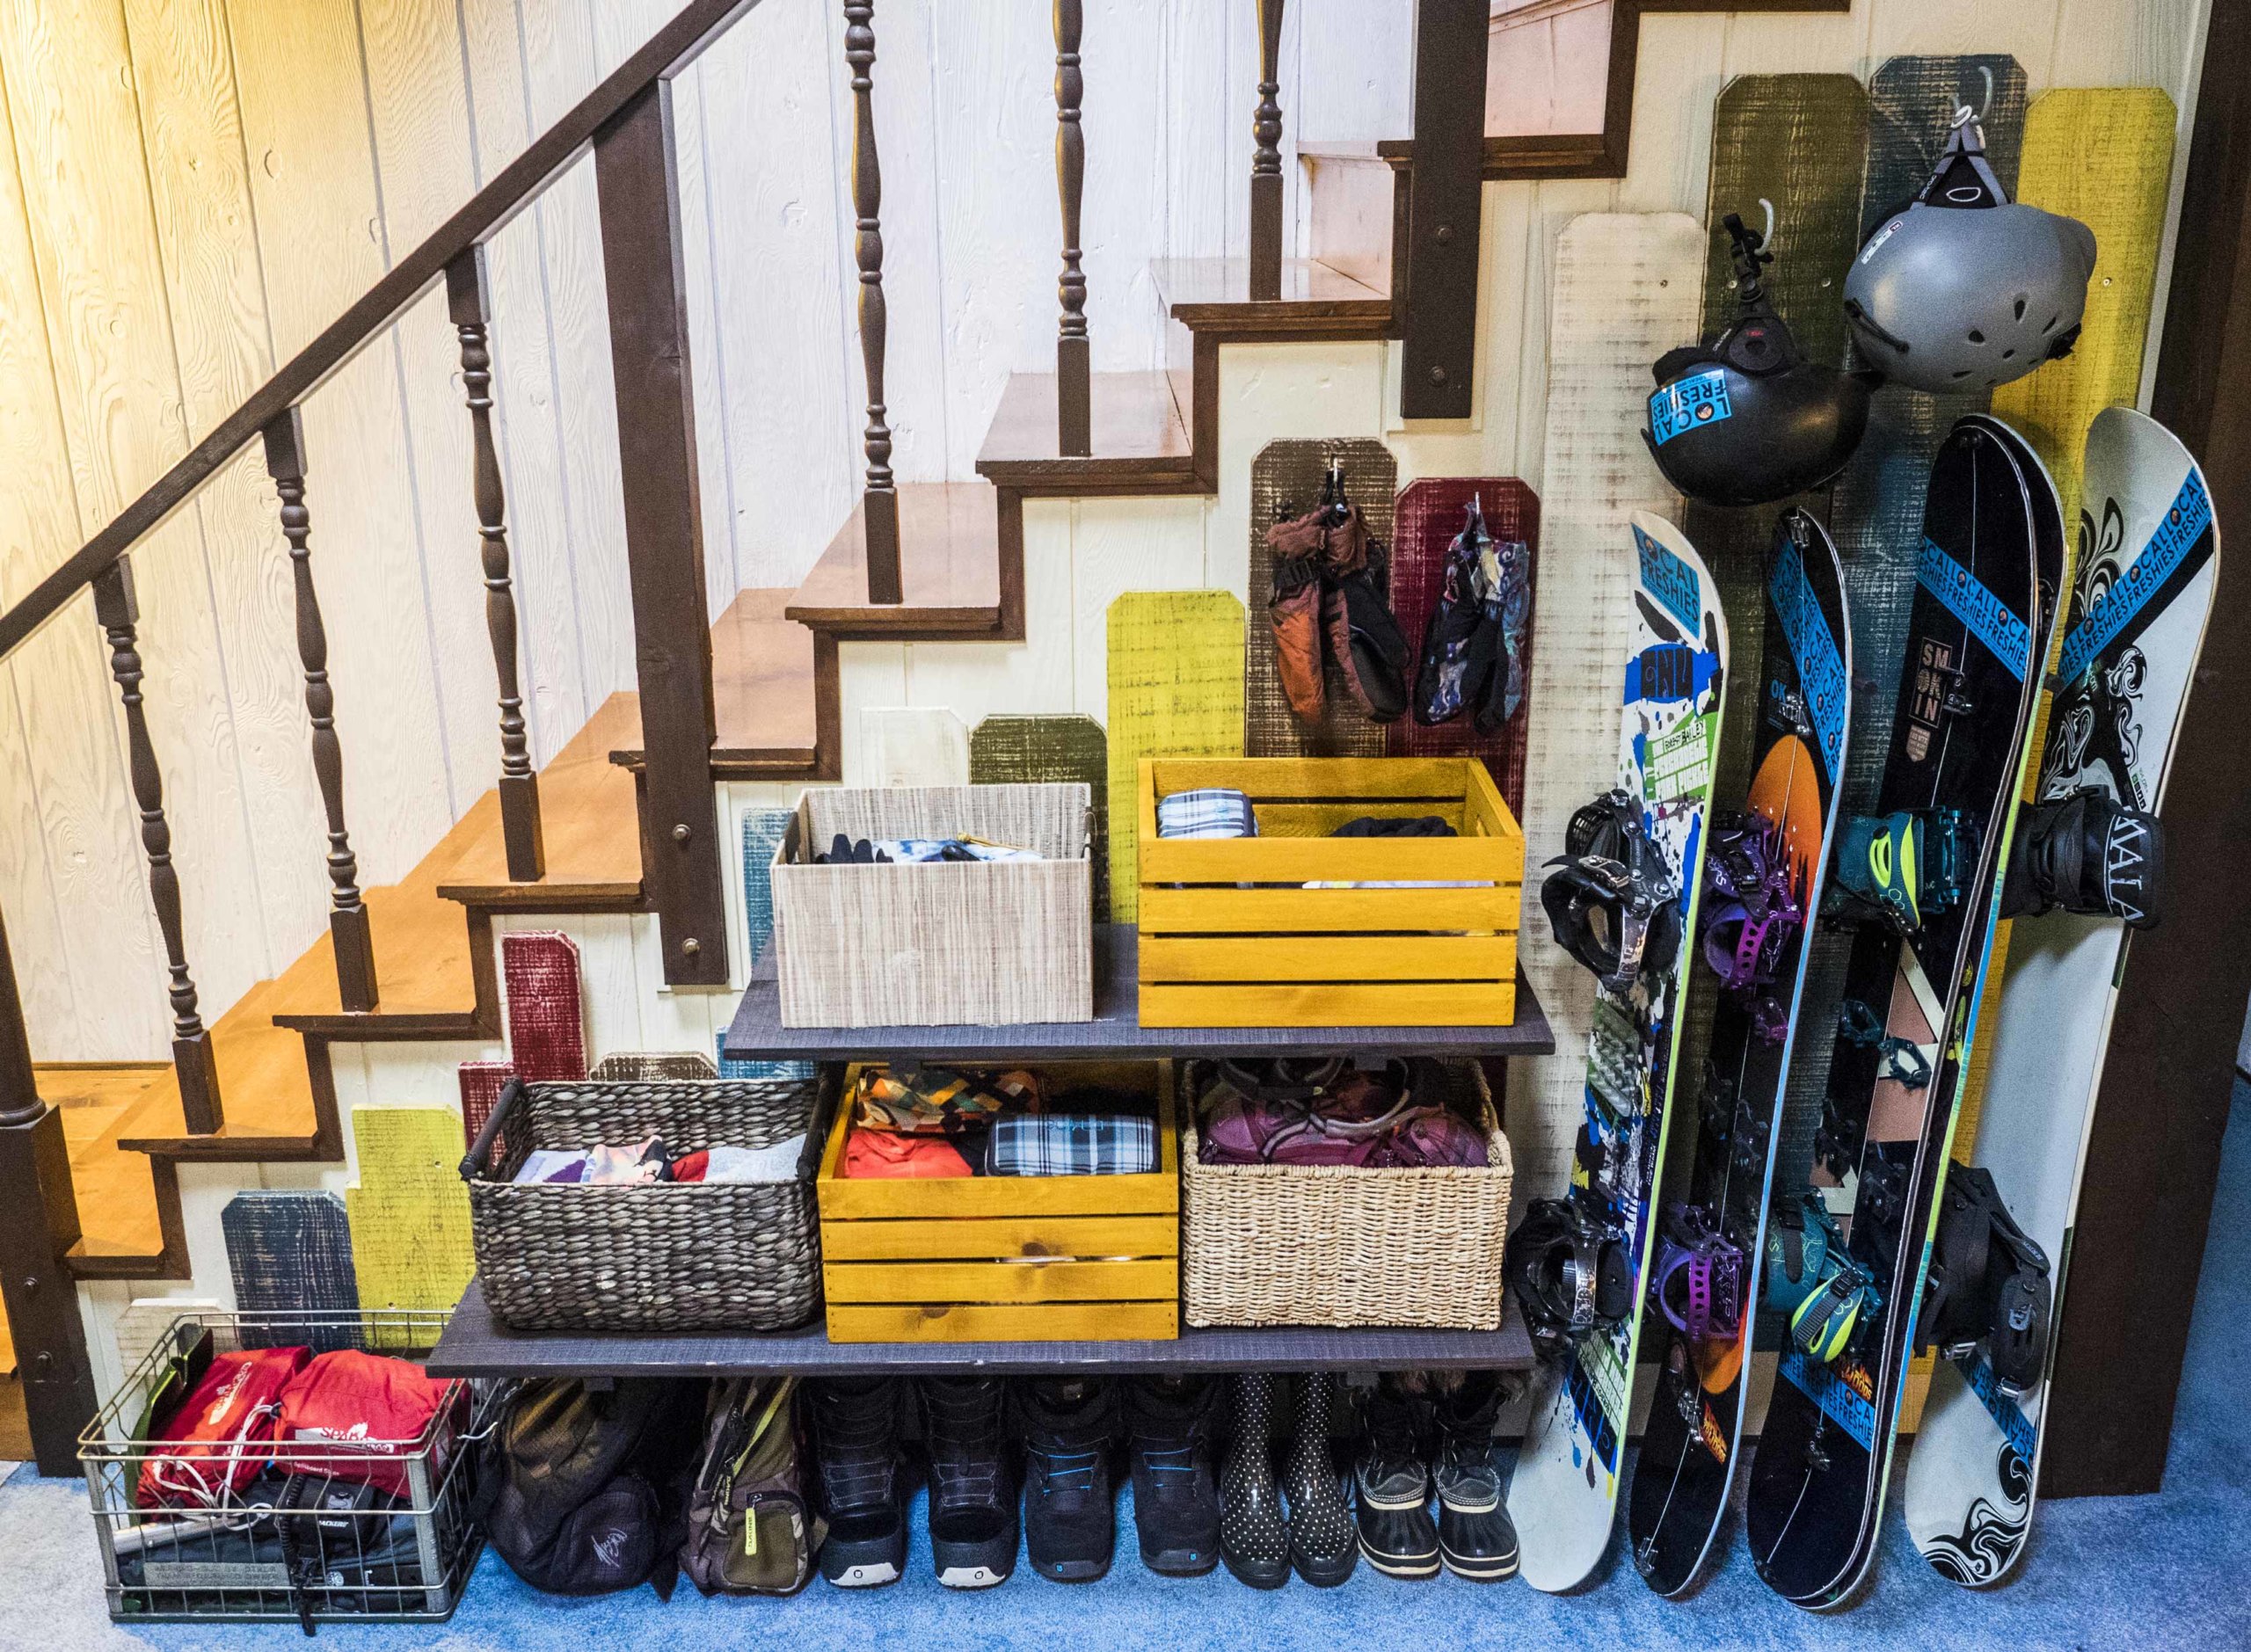 Organizational Design: A ‘Completed’ Snowboard Feature Wall for the Mountain Life